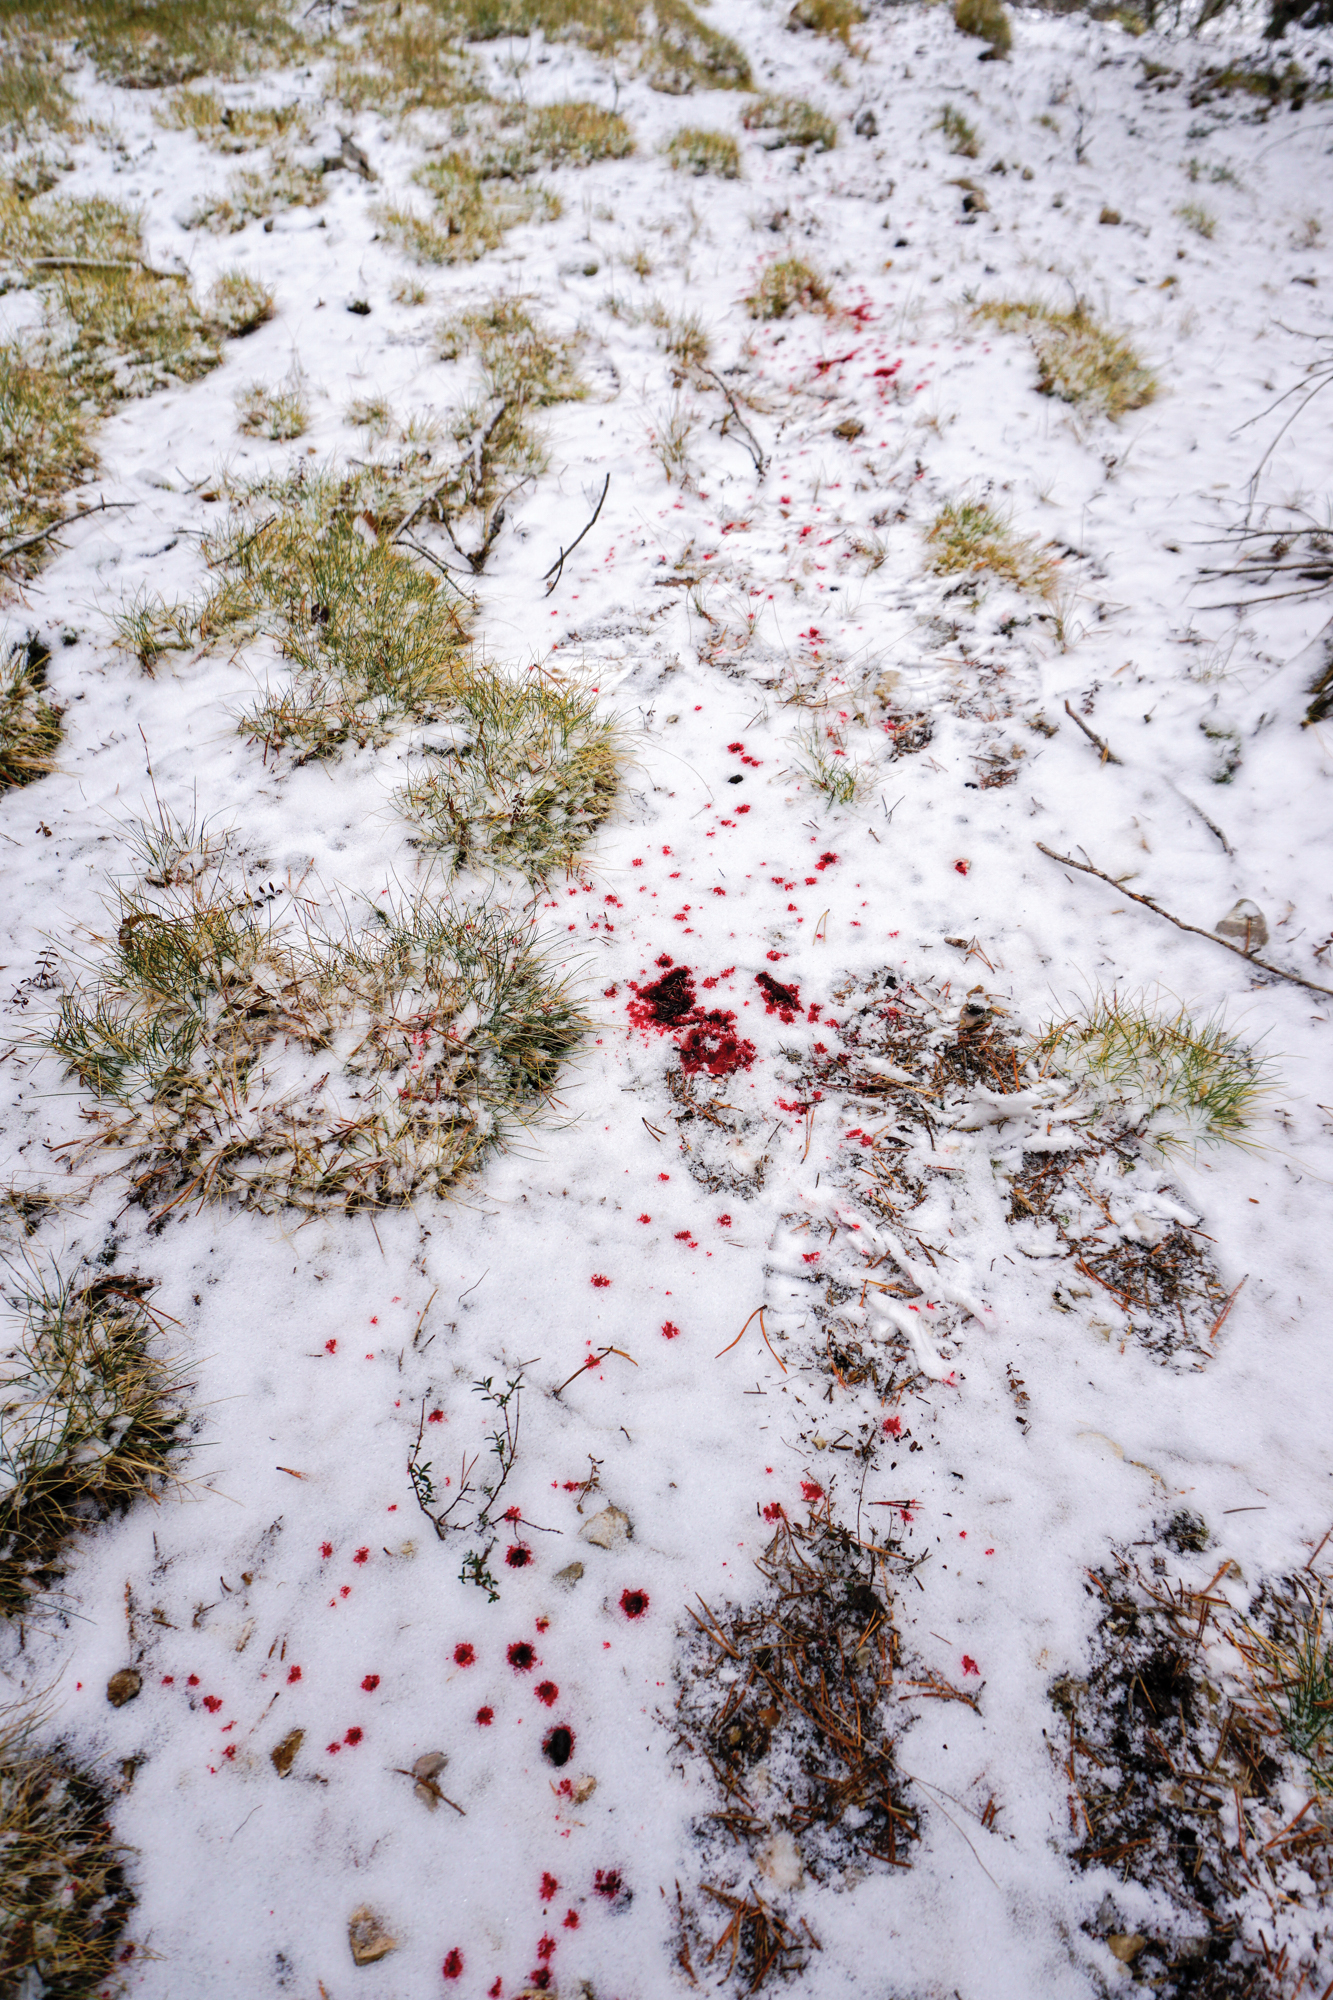 A blood trail in the snow of the Spanish mountains.